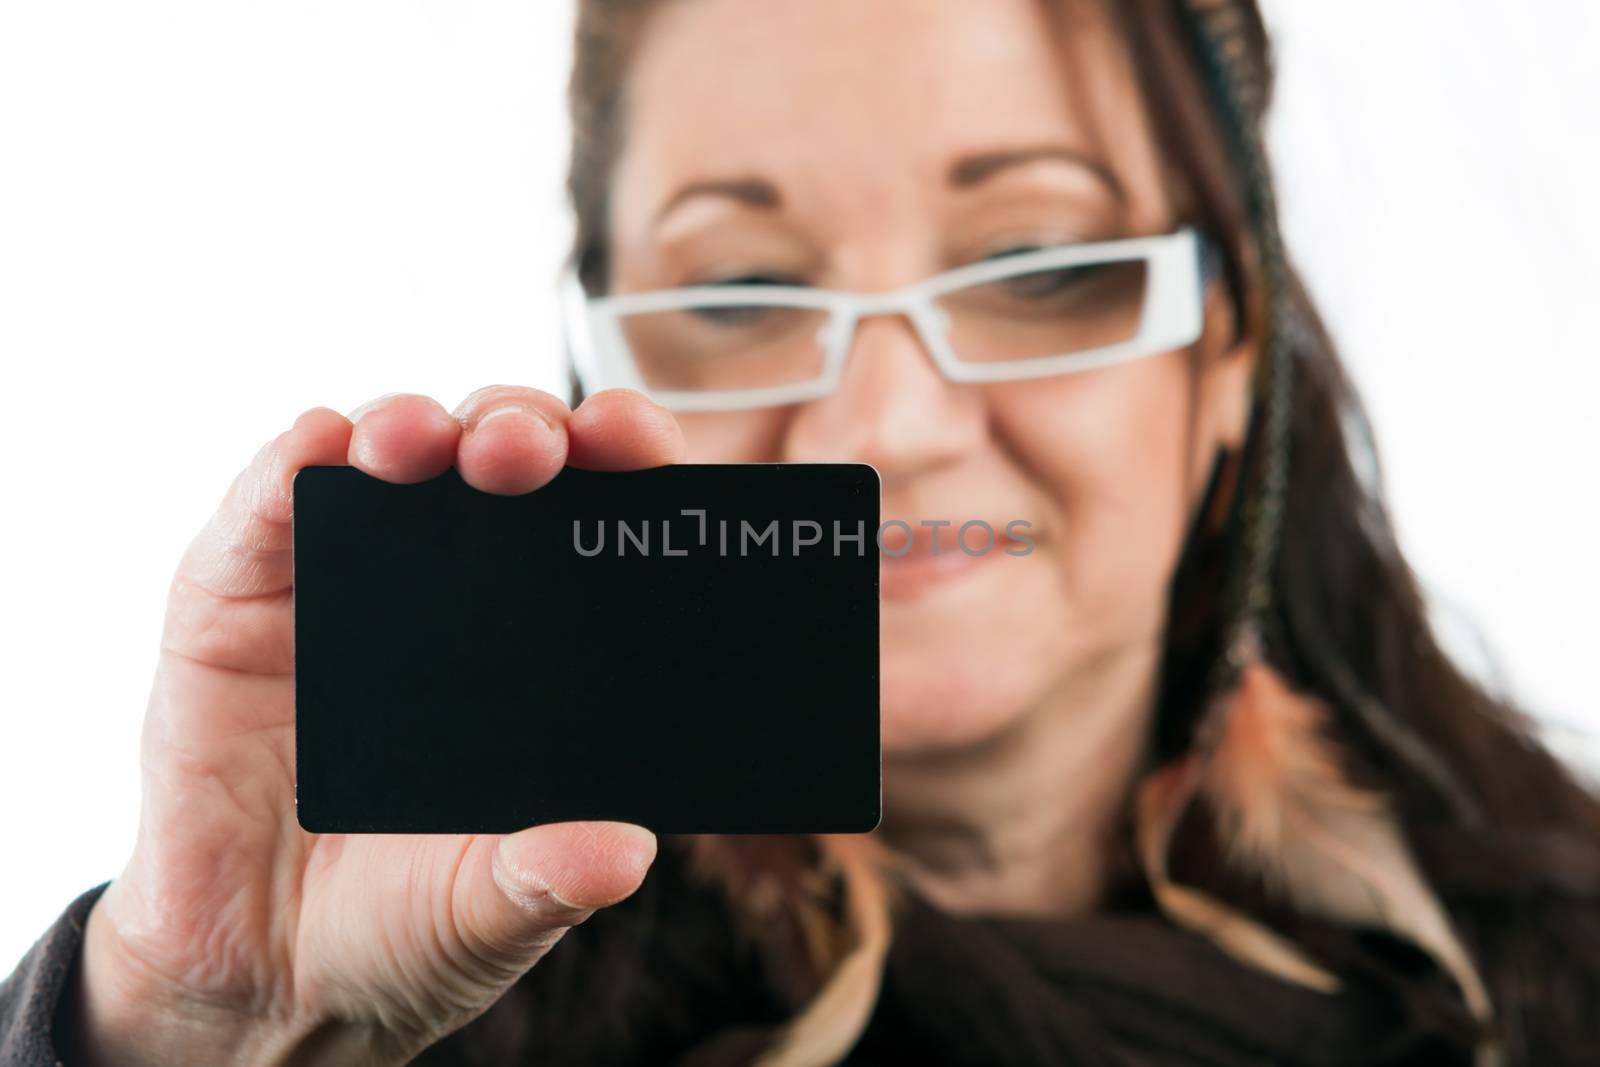 Brunette woman holding up a blank credit card business card shoppers club card or gift card of some sort with copyspace. Shallow depth of field.